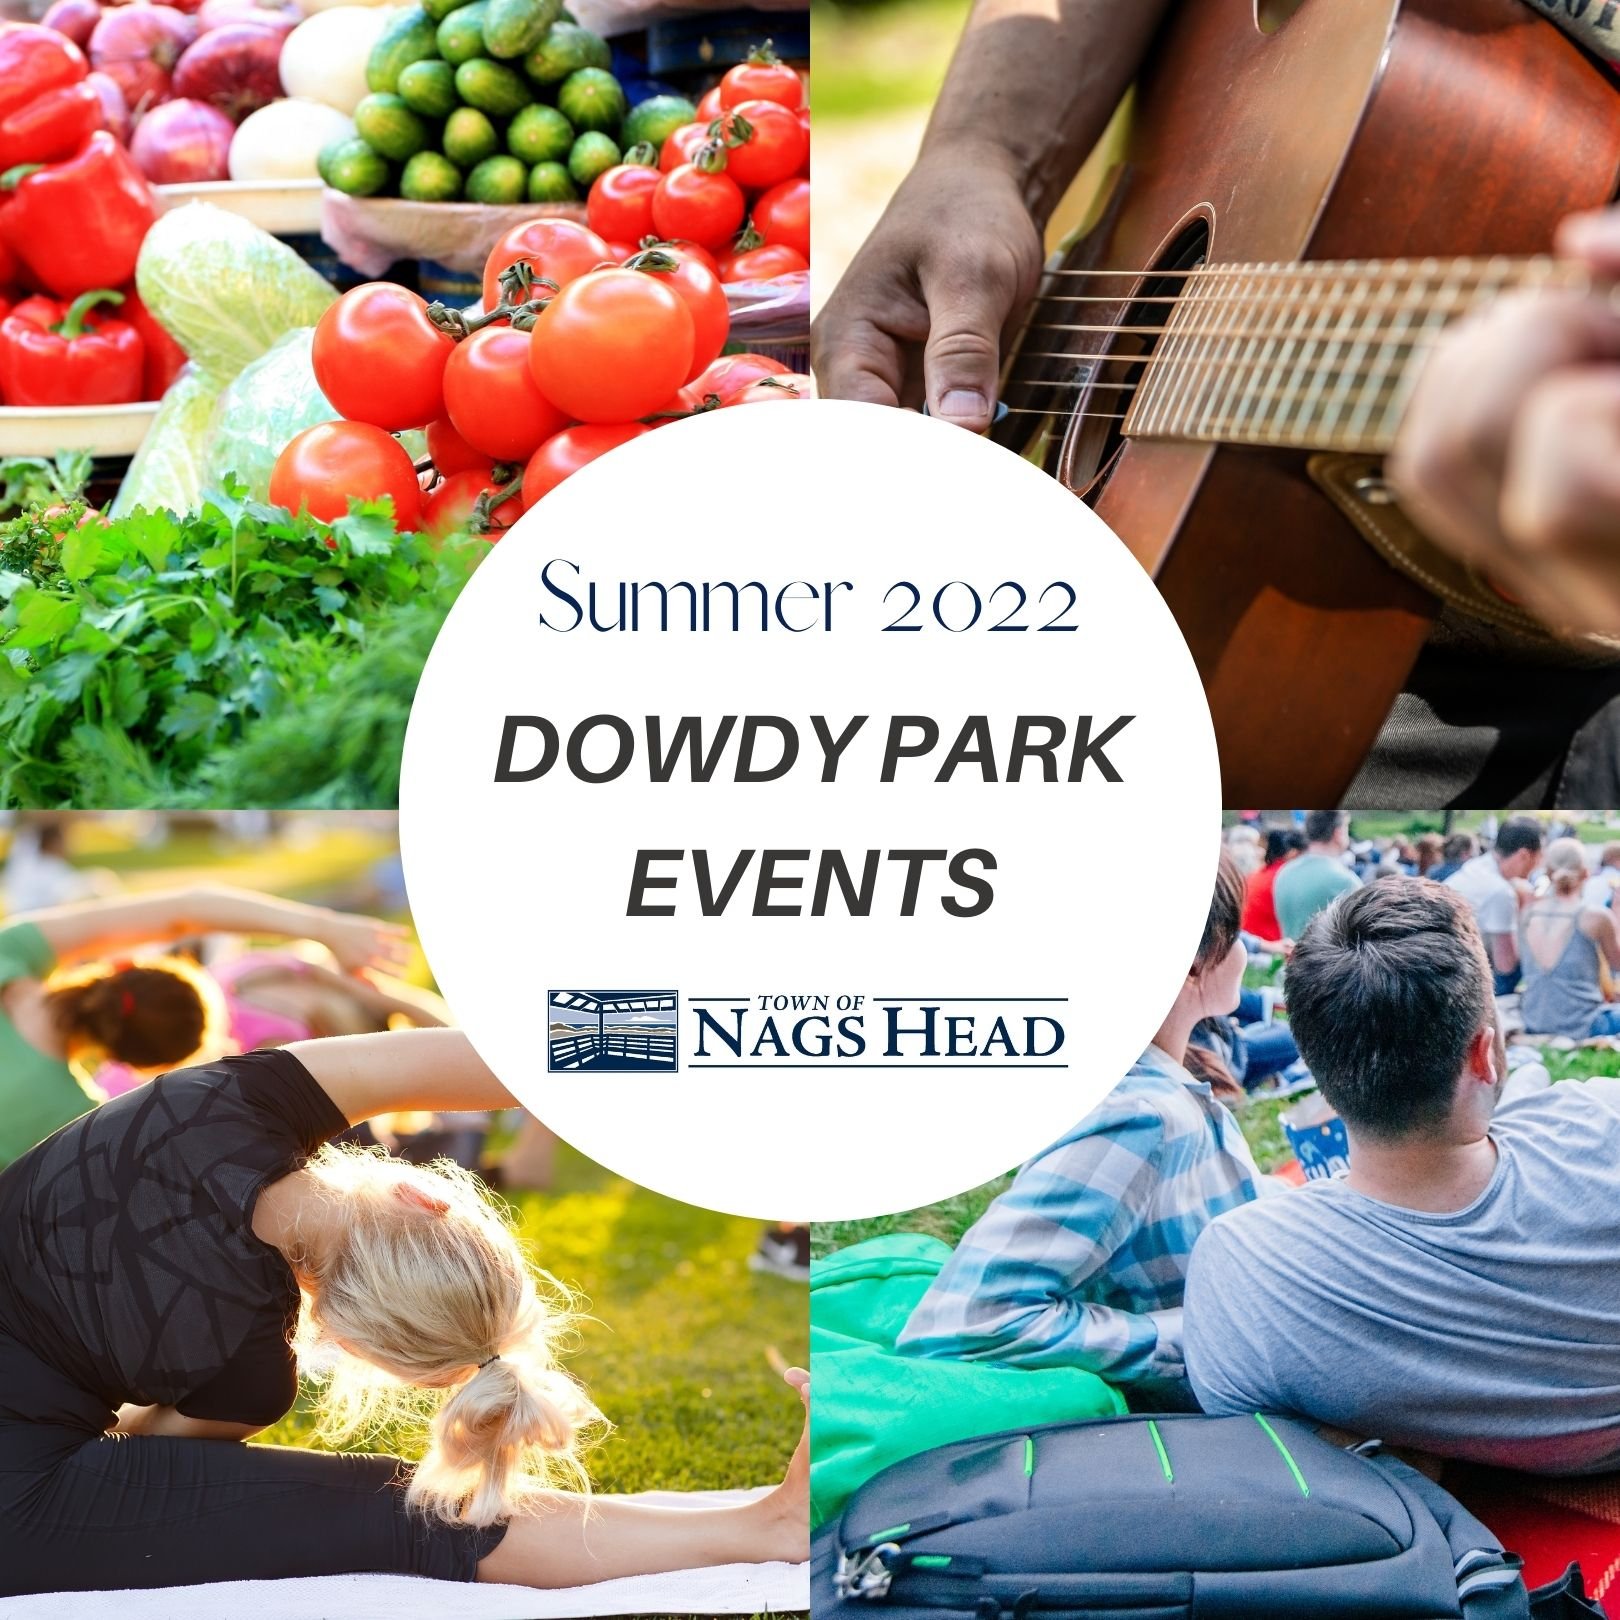 Nags Head needs your input on accepting sponsorships of Dowdy Park events